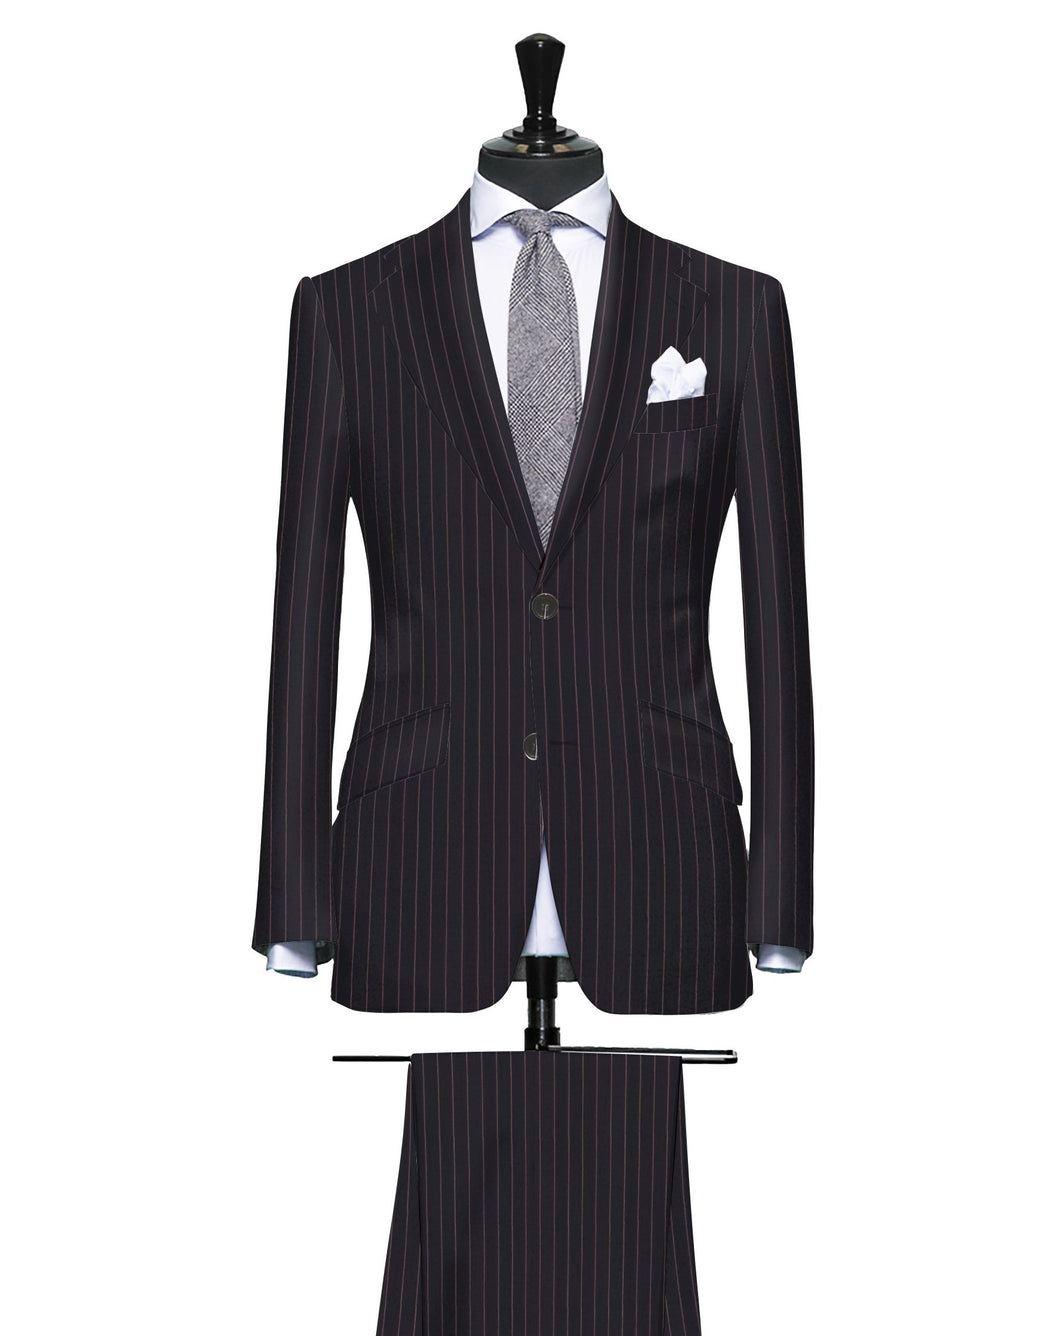 Navy Blue with Subtle Red Pinstripe, Super 150, Wool